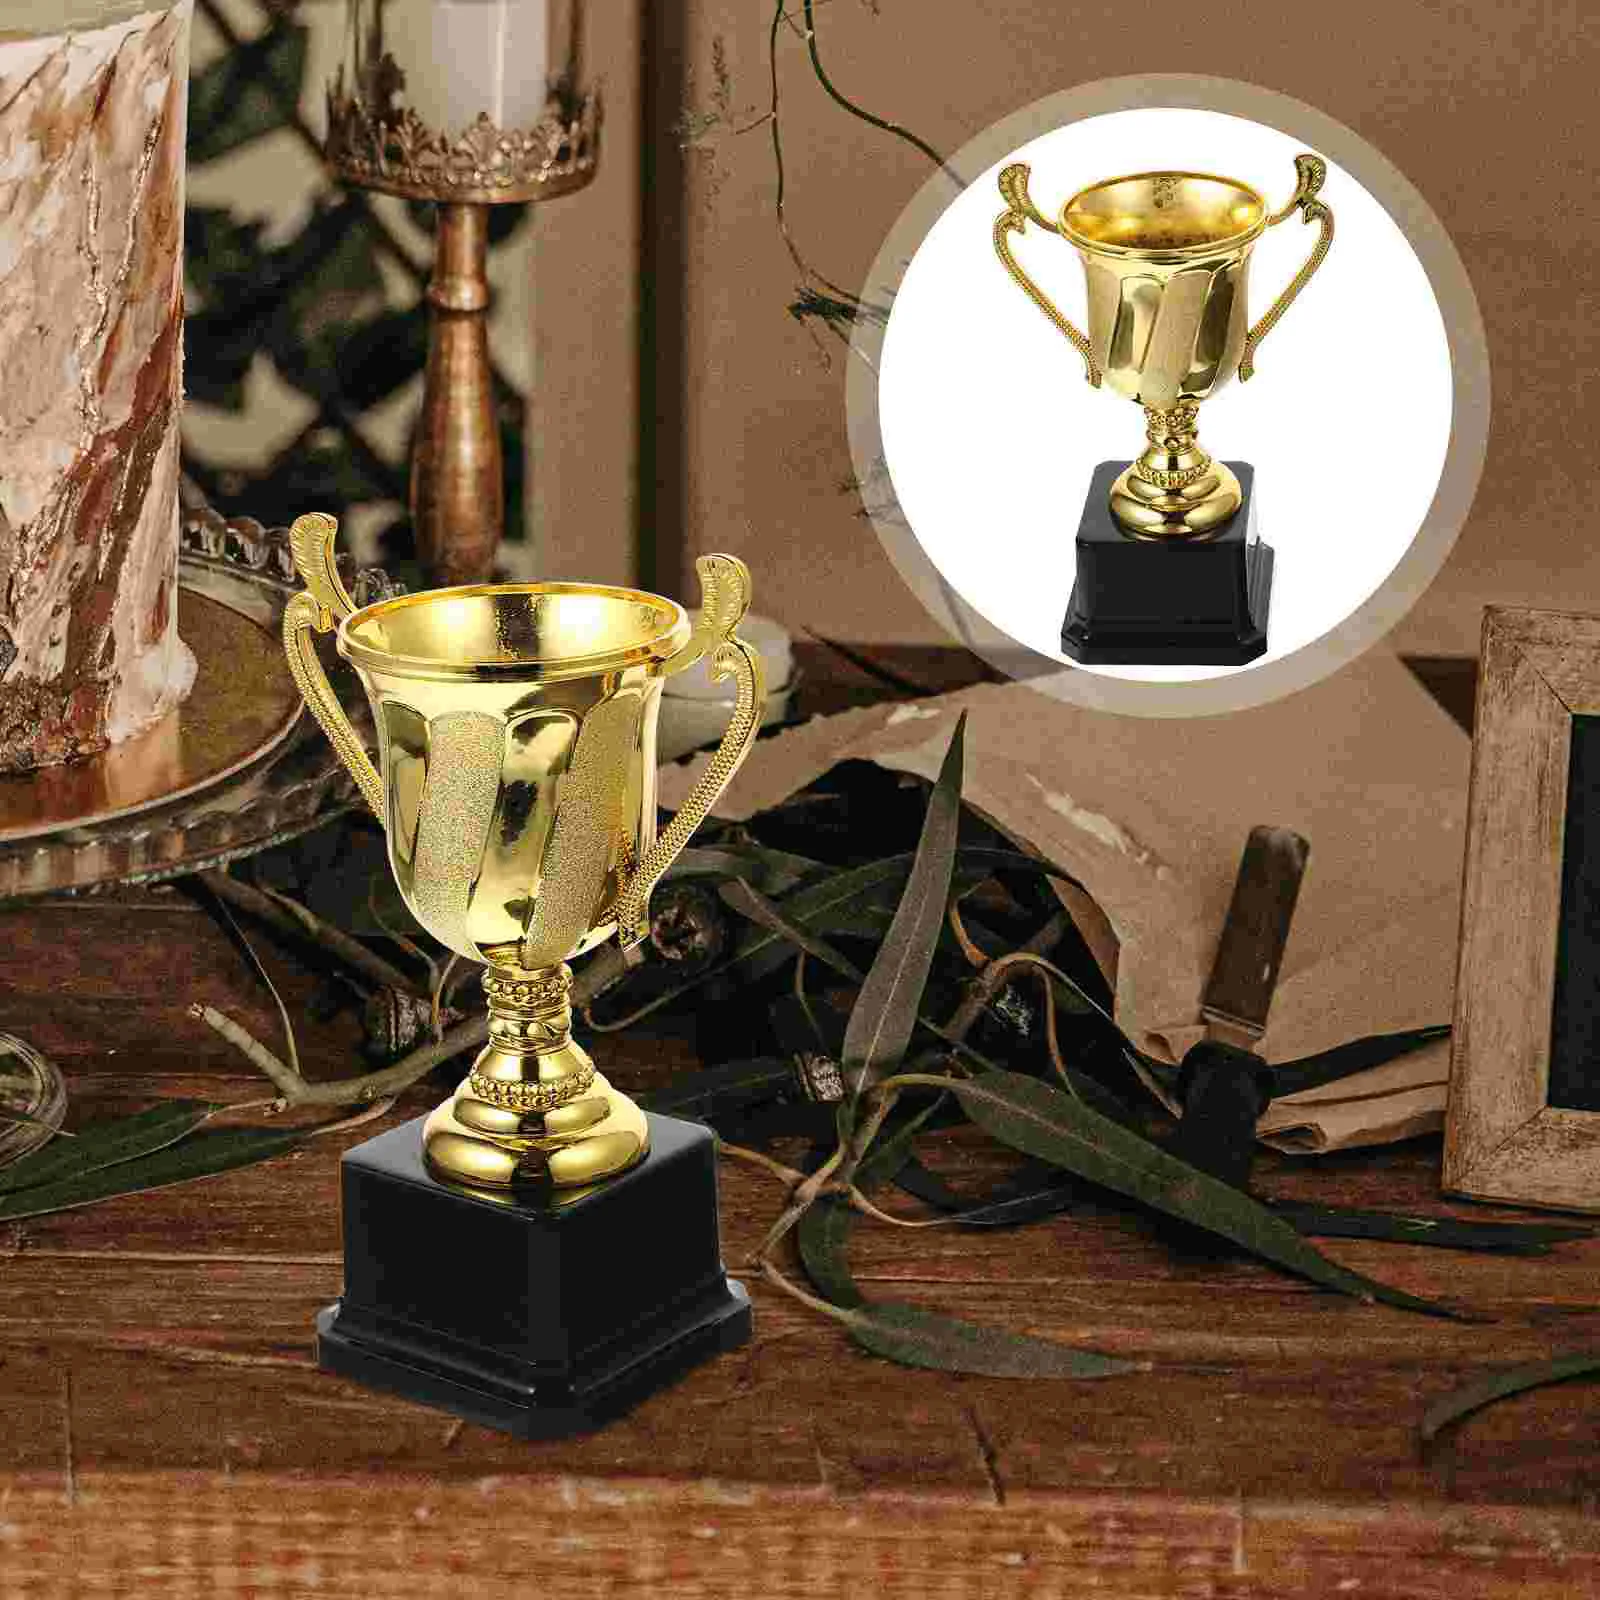 Children's Competition Trophy Plastic Trophies Kid Competitions Gold Prop Compact Sports Soccer 1 pcs trophy cup for sports meeting competitions soccer winner team awards and competition parties favors gold metal